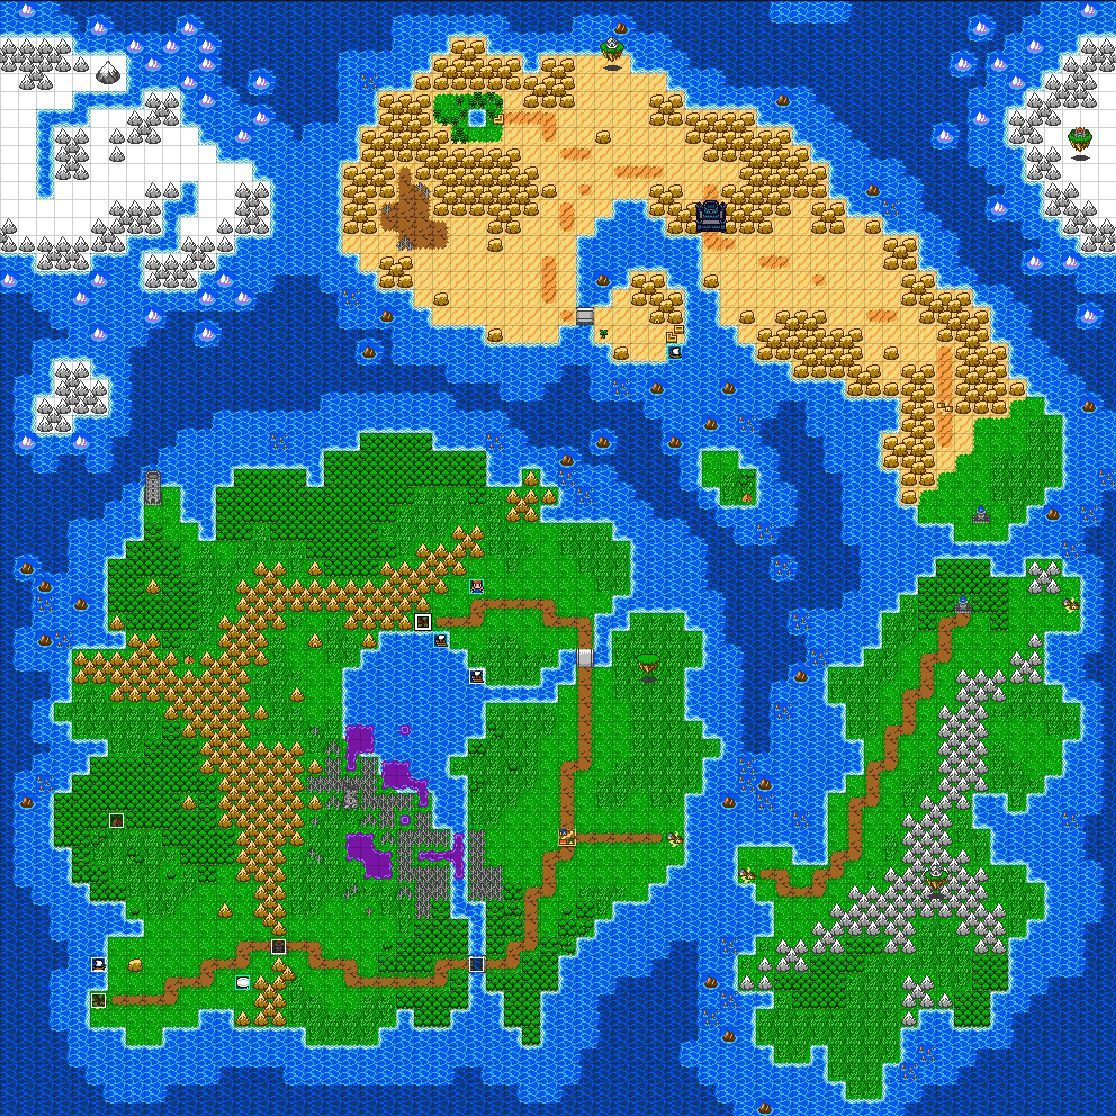 The SimpleQuest 2 overworld